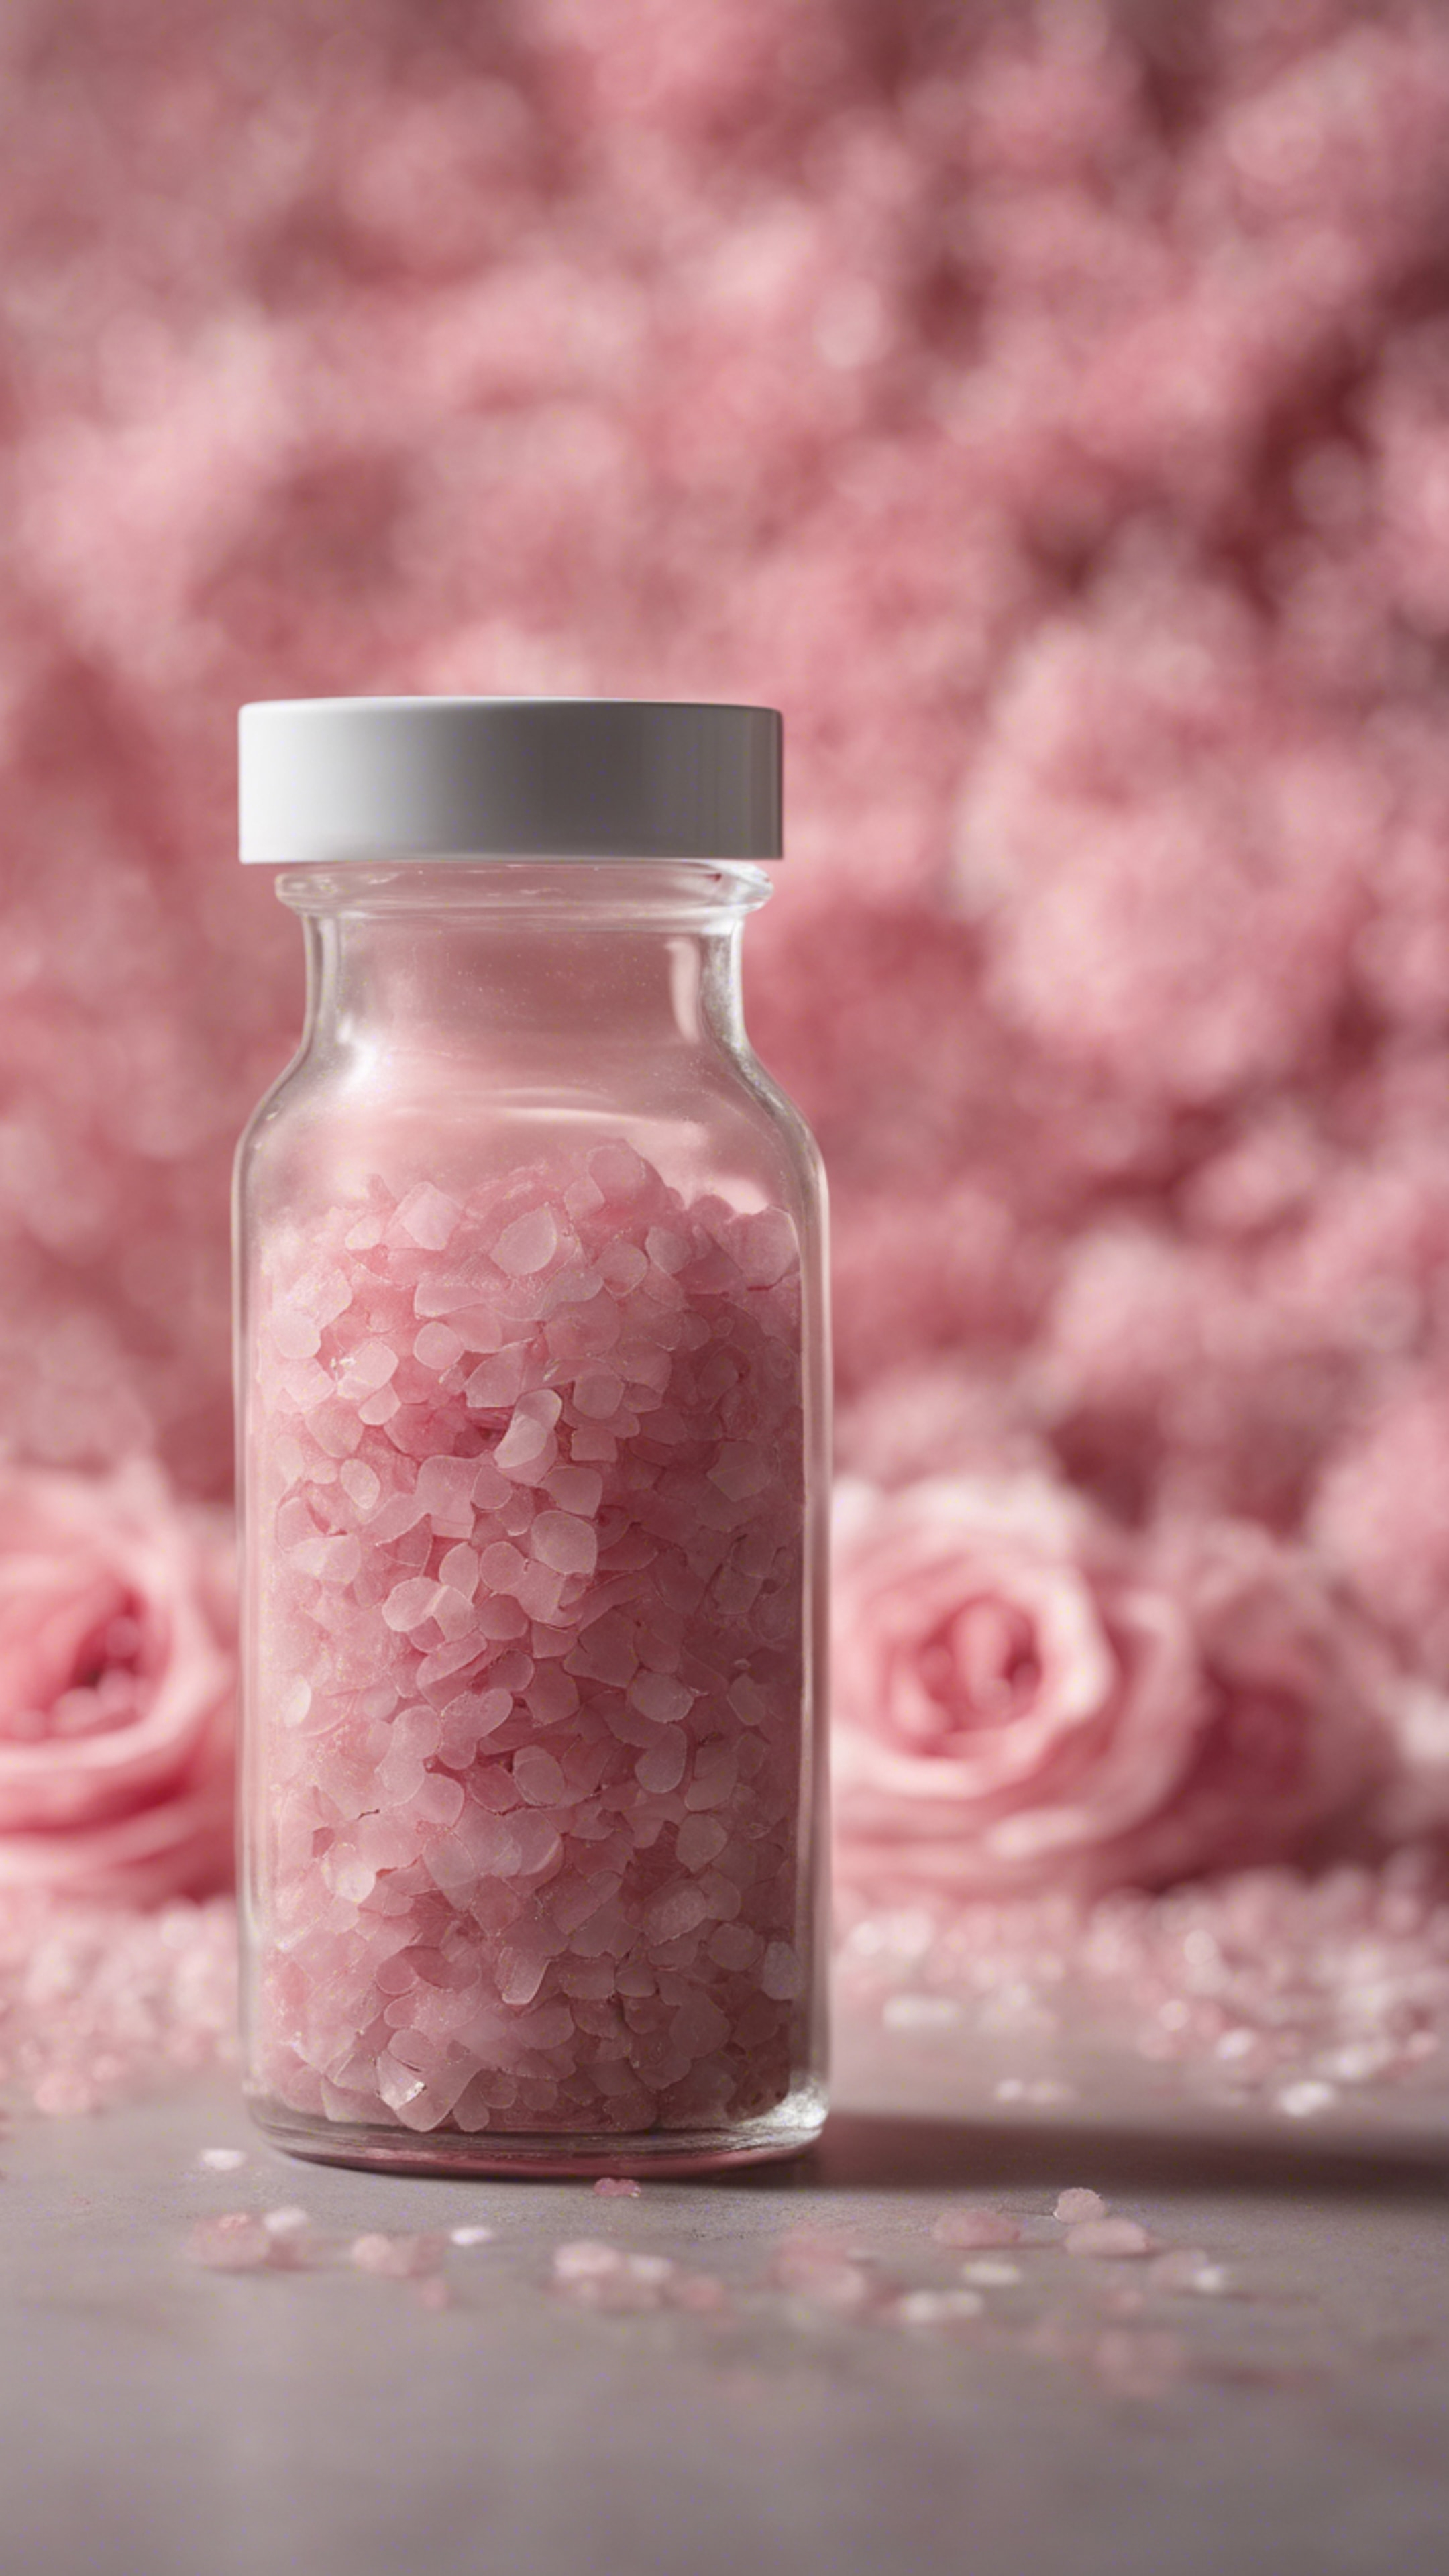 A modern, minimalist, recycled glass bottle filled with rose-colored bath salts against a concrete backdrop. Hintergrund[d3334b5ed23046b498f0]